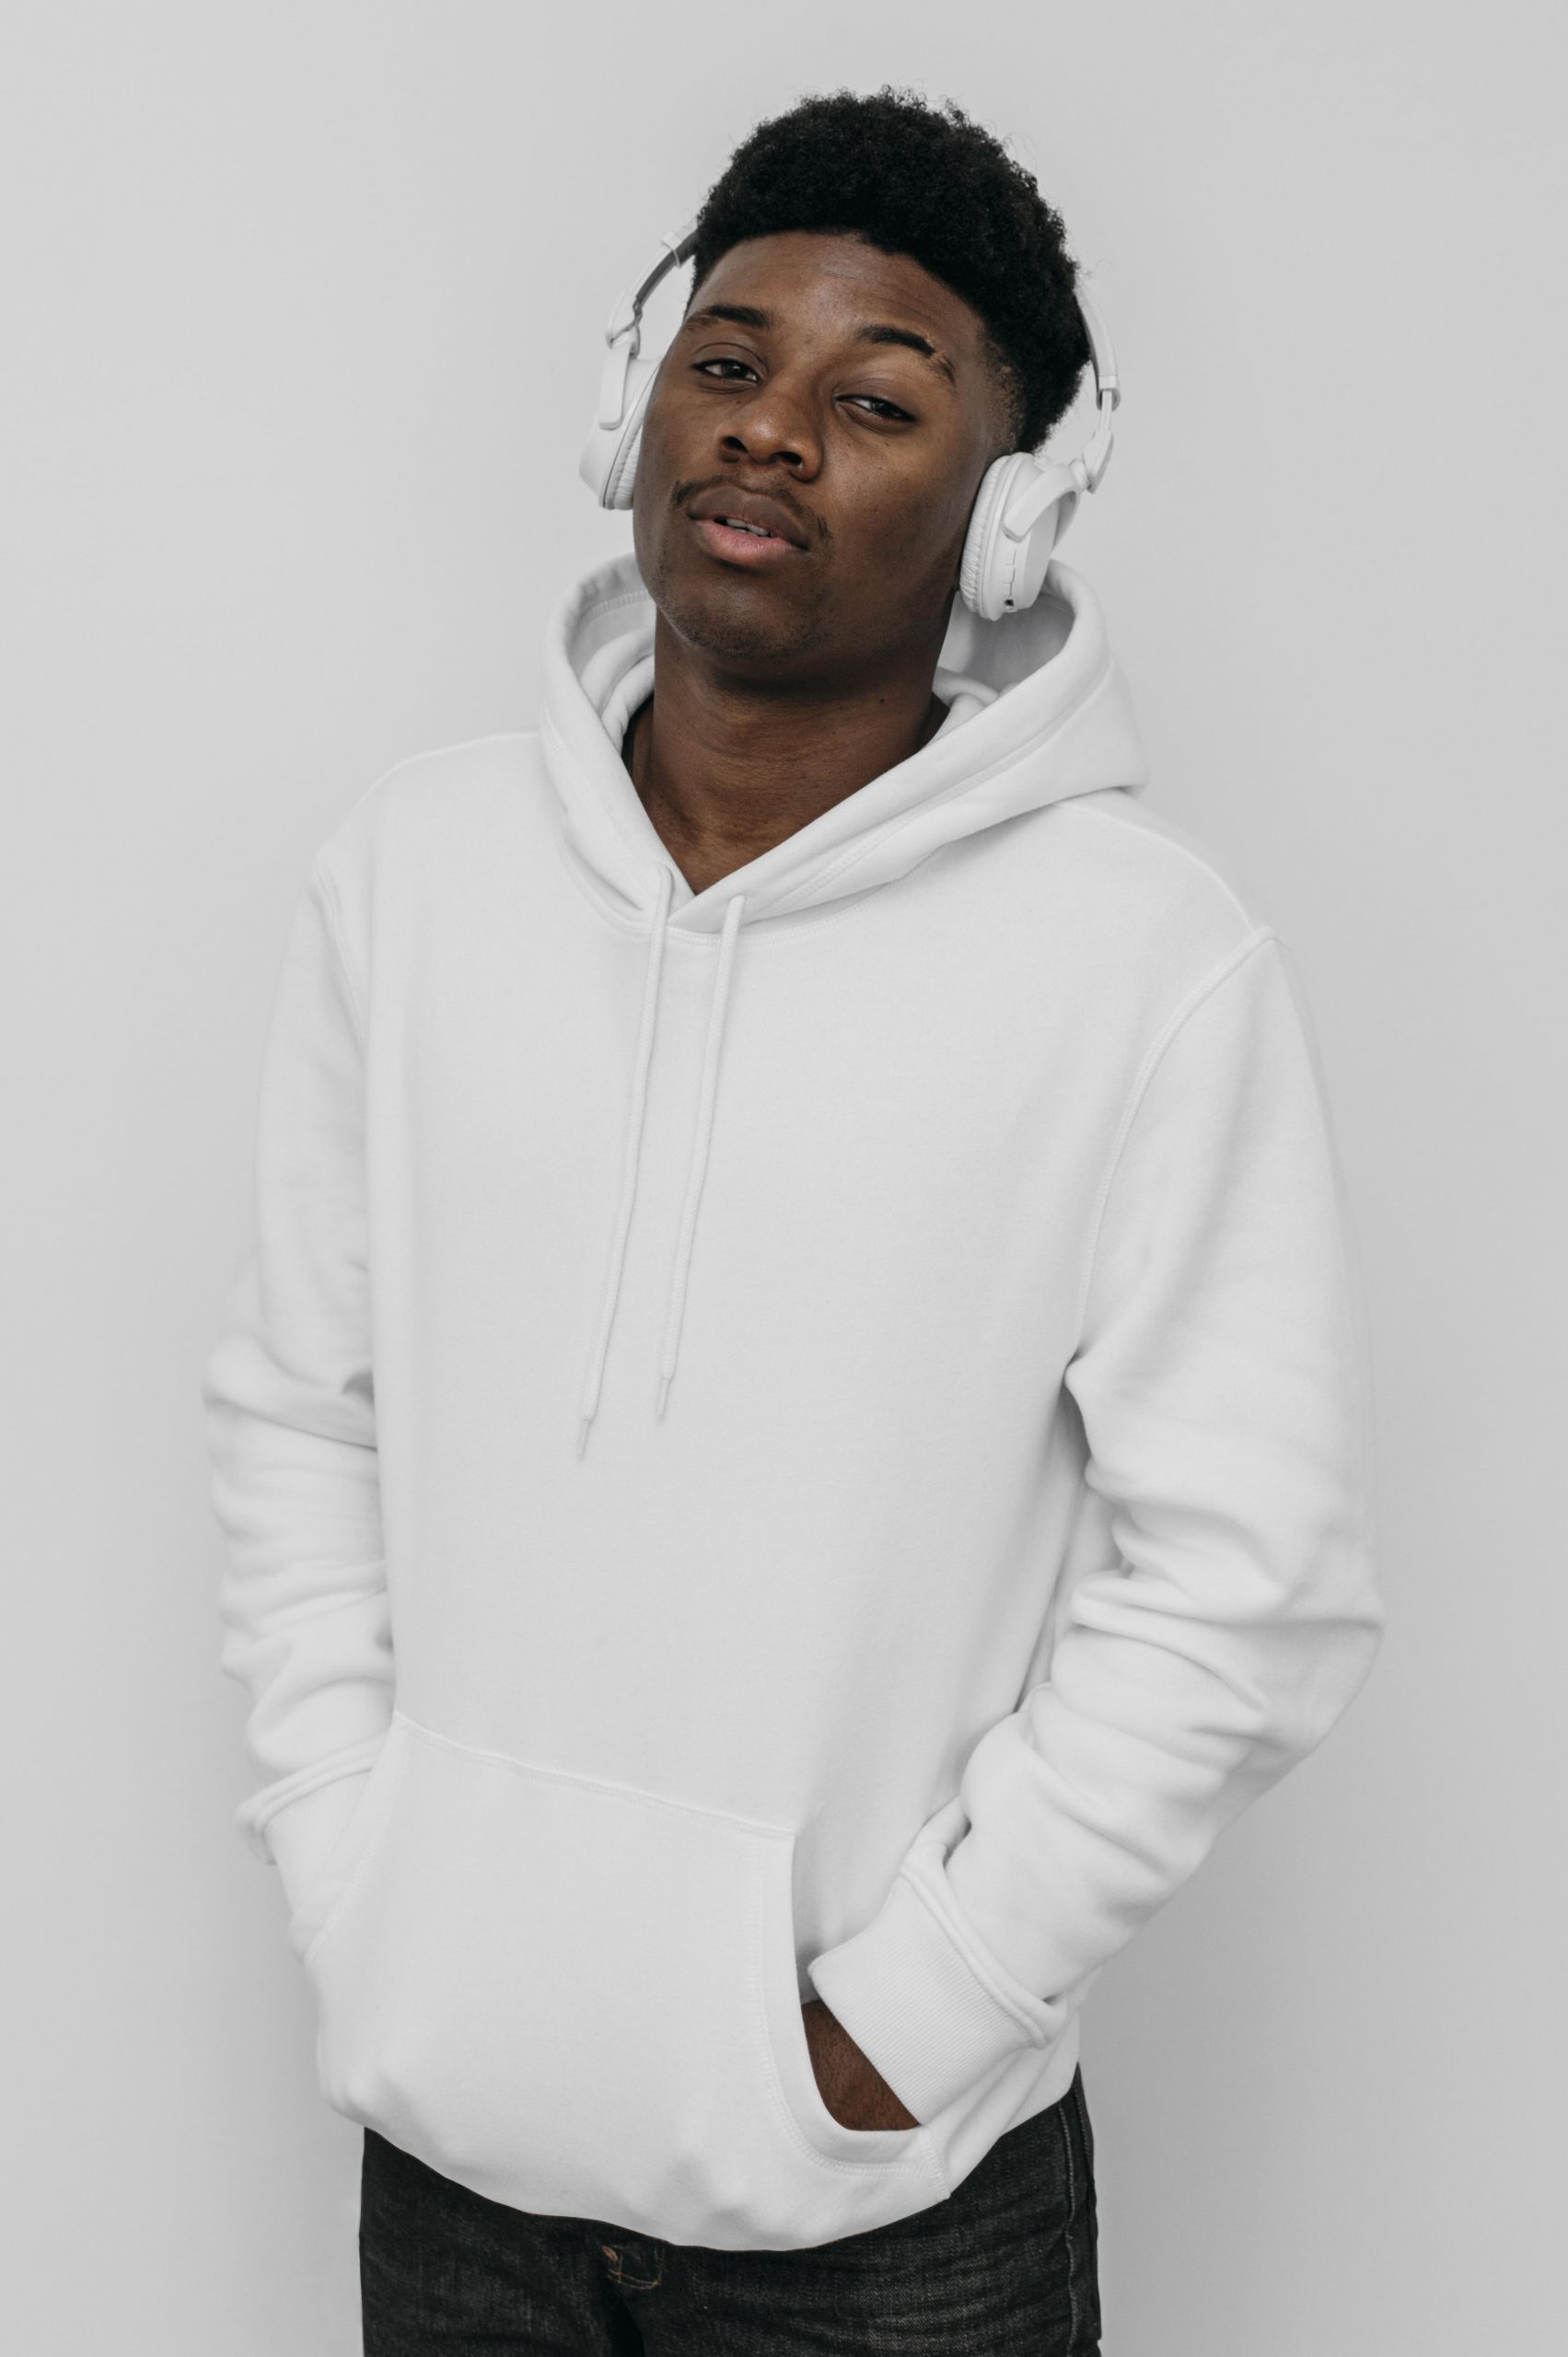 stylish hoodies for men - Are Hoodies A Great Collection For Men's Wardrobe?